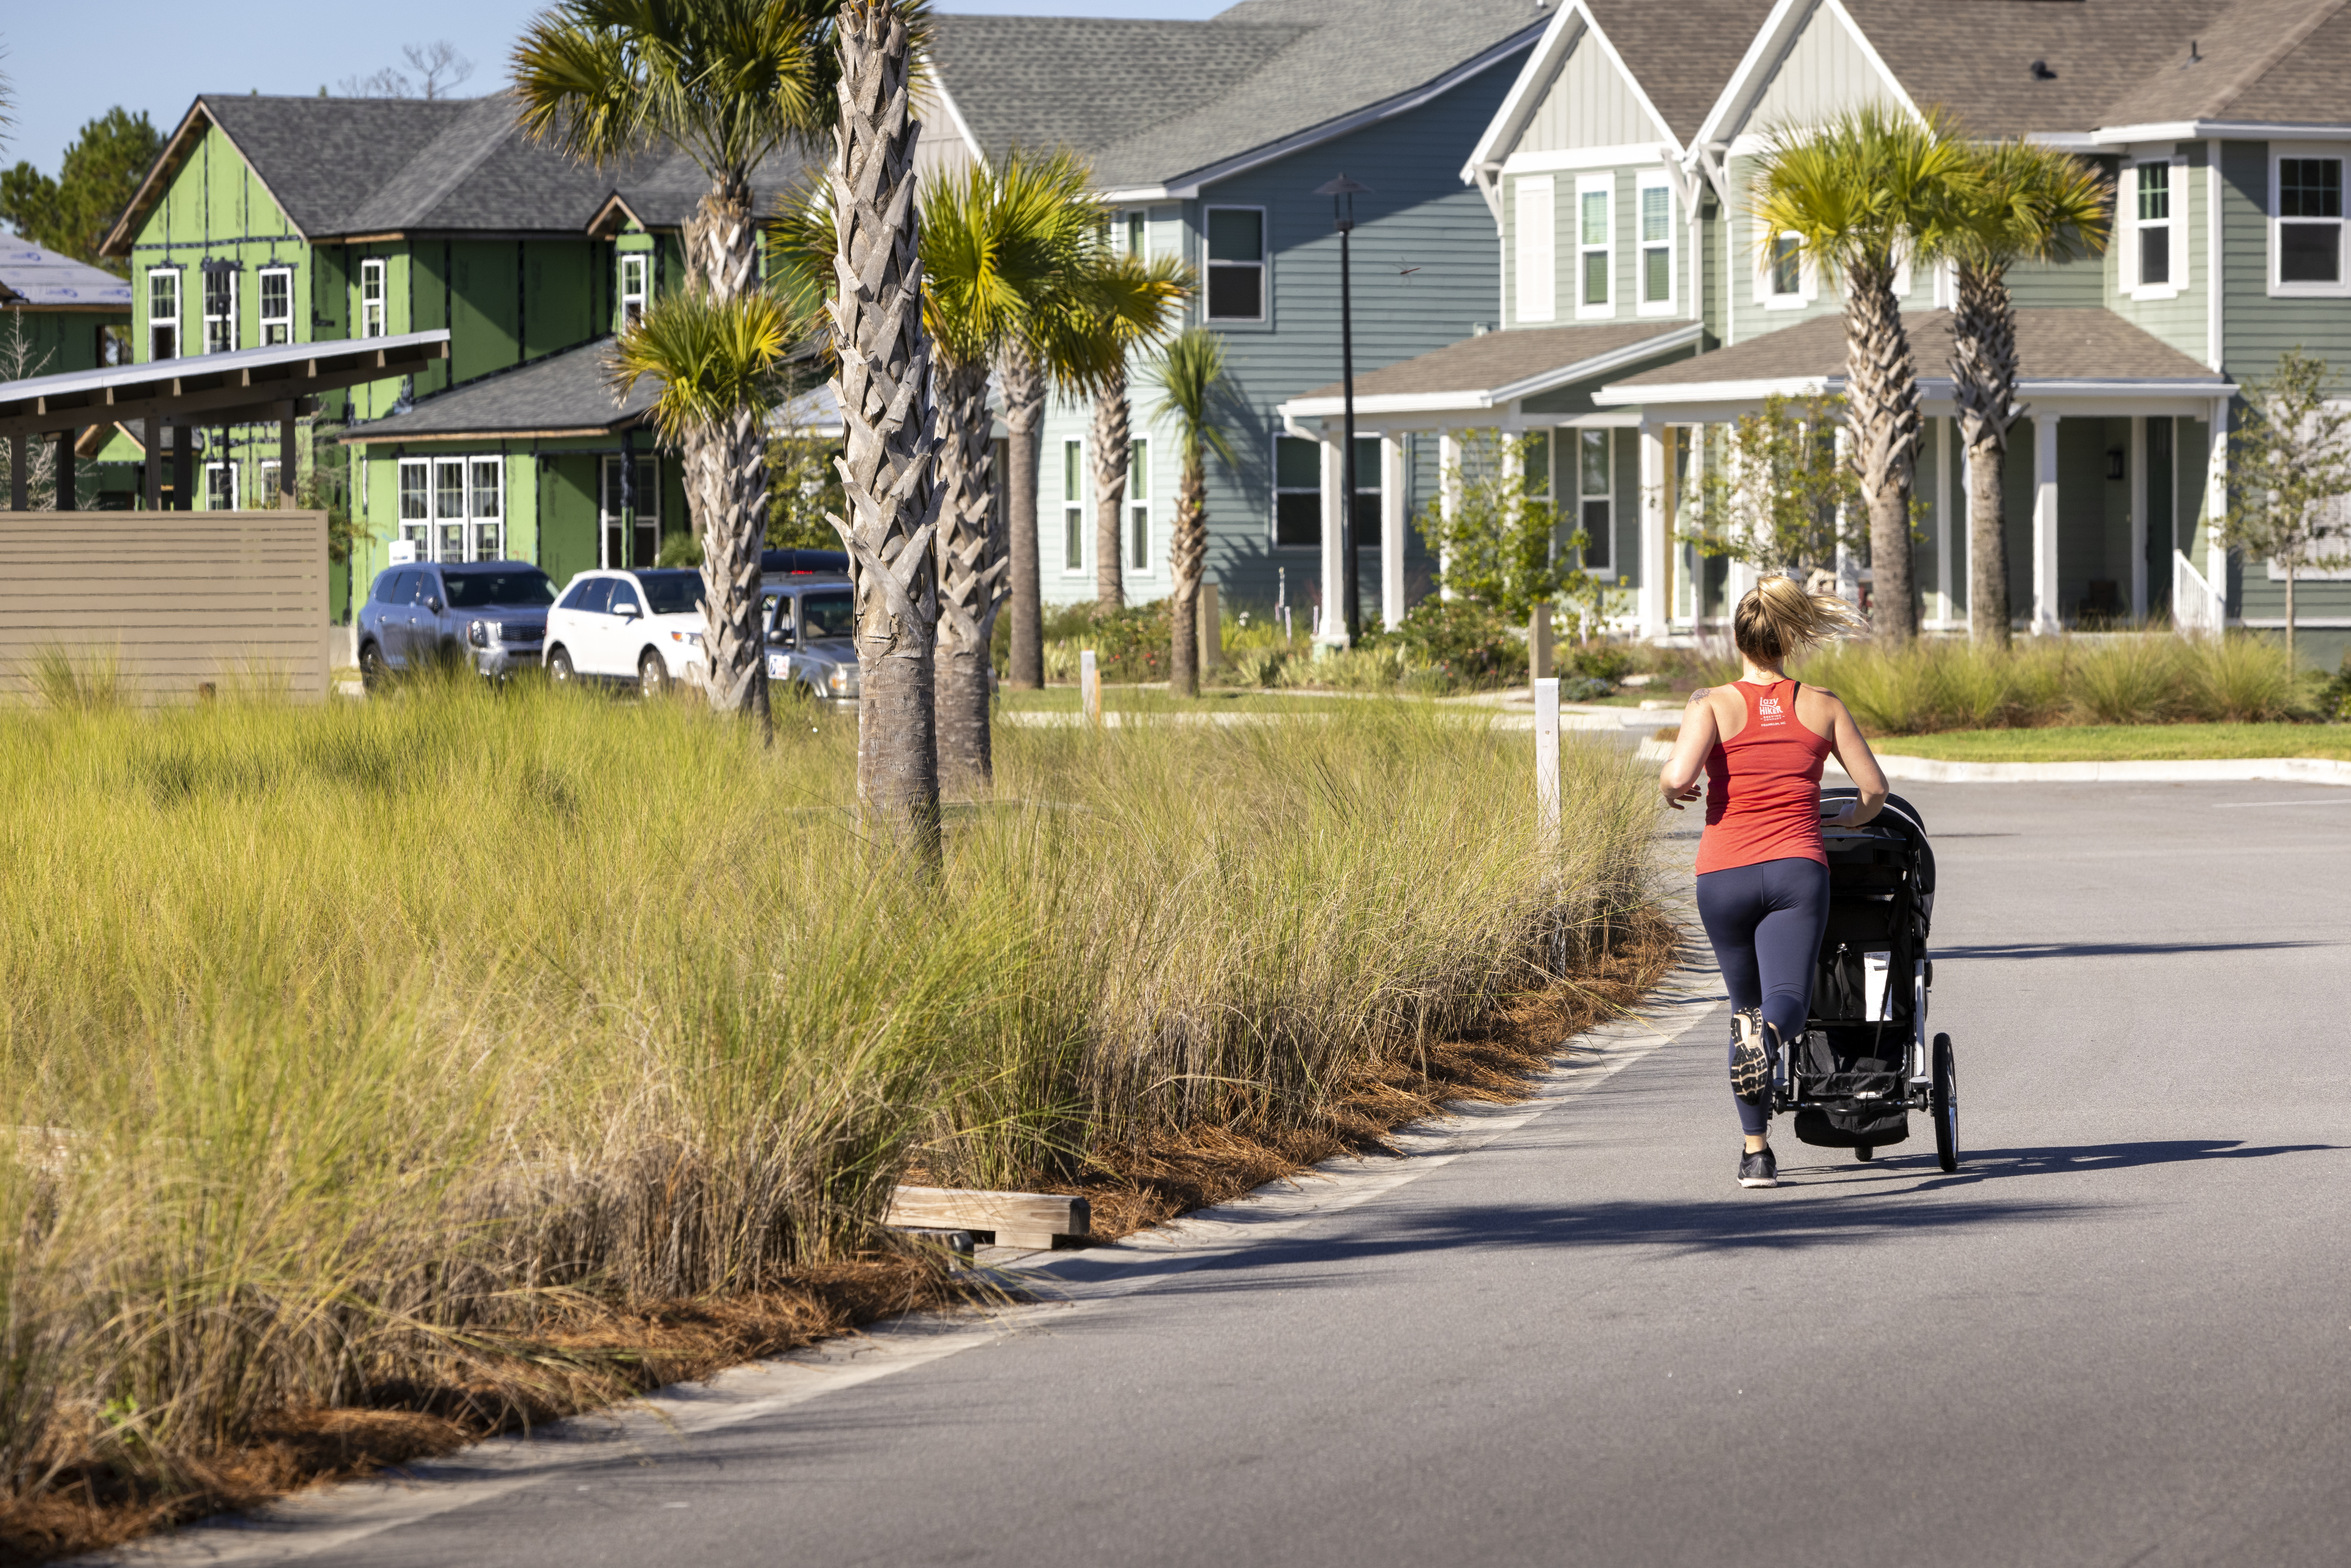 Woman with stroller going for a jog in neighborhood with palm trees.